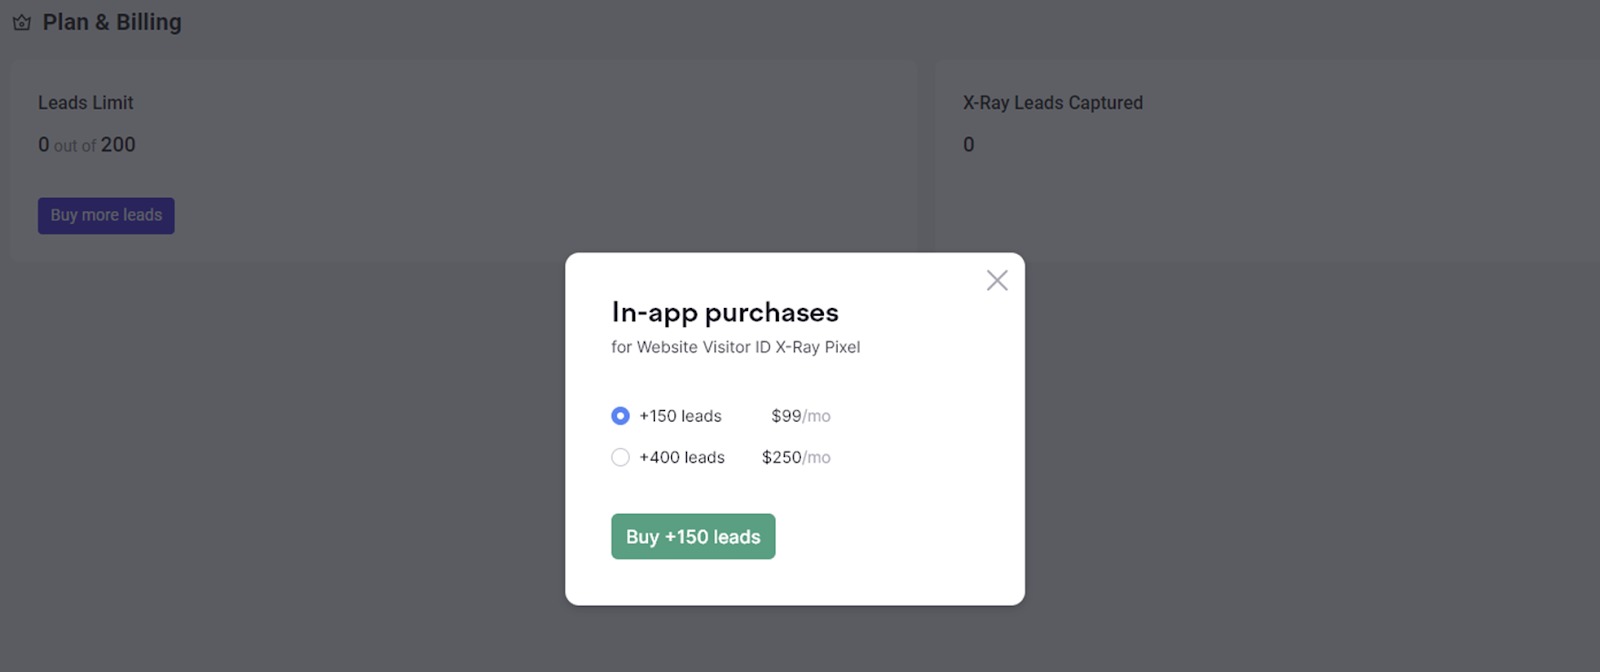 Making in-app purchases in the X-Ray app for additional leads.